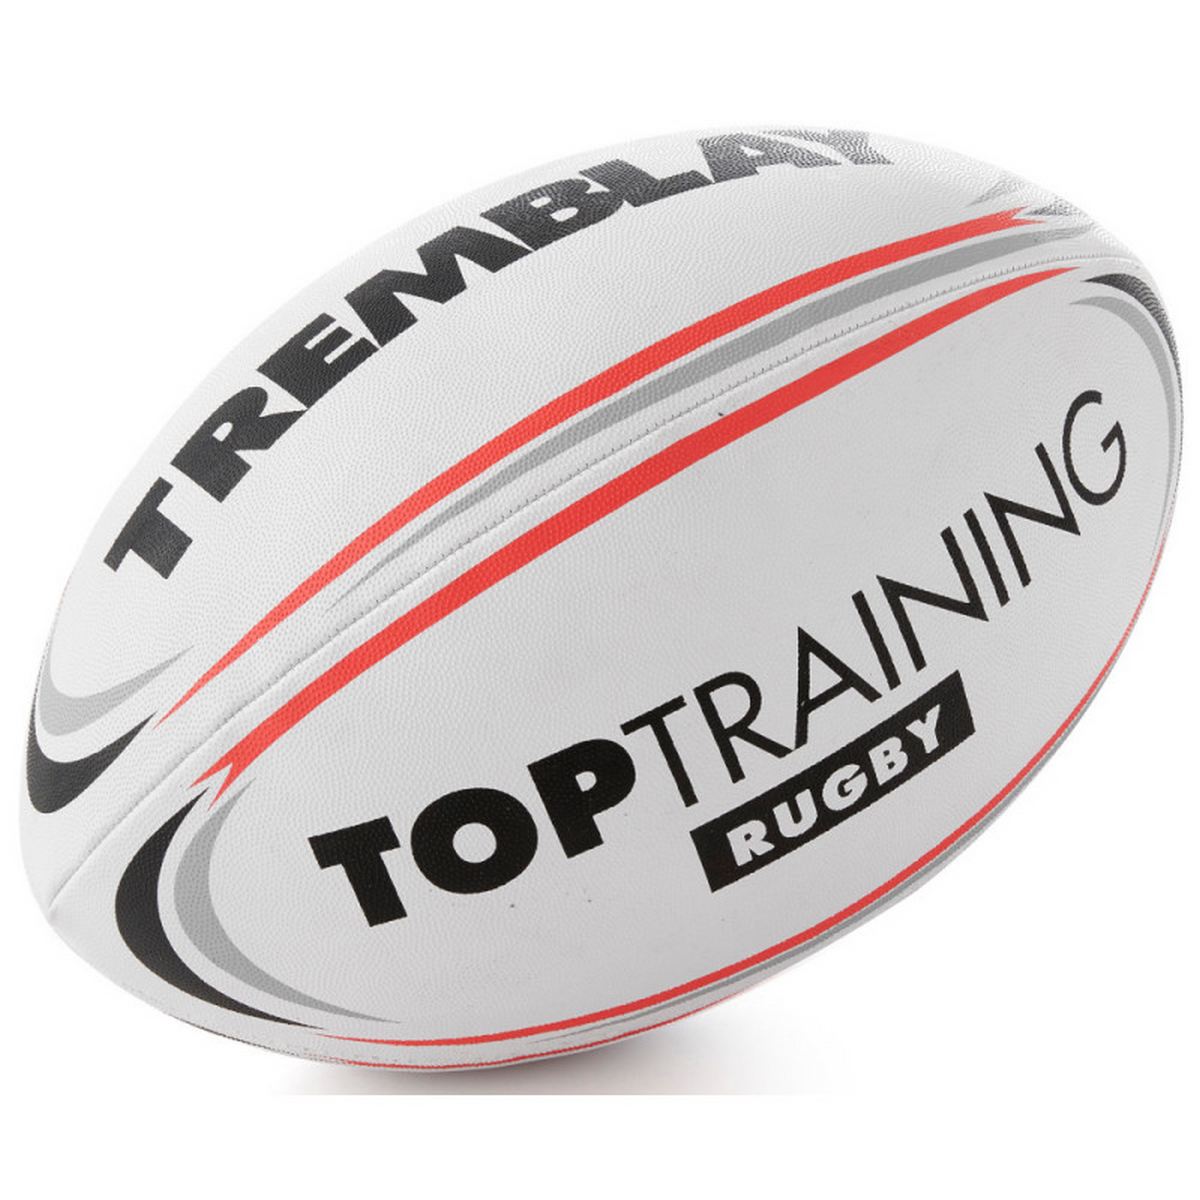 TREMBLAY_RCL5_ballon_de_rugby_TOP_TRAINING_taille-5_blanc-rouge_sgequipement_sg_equipement